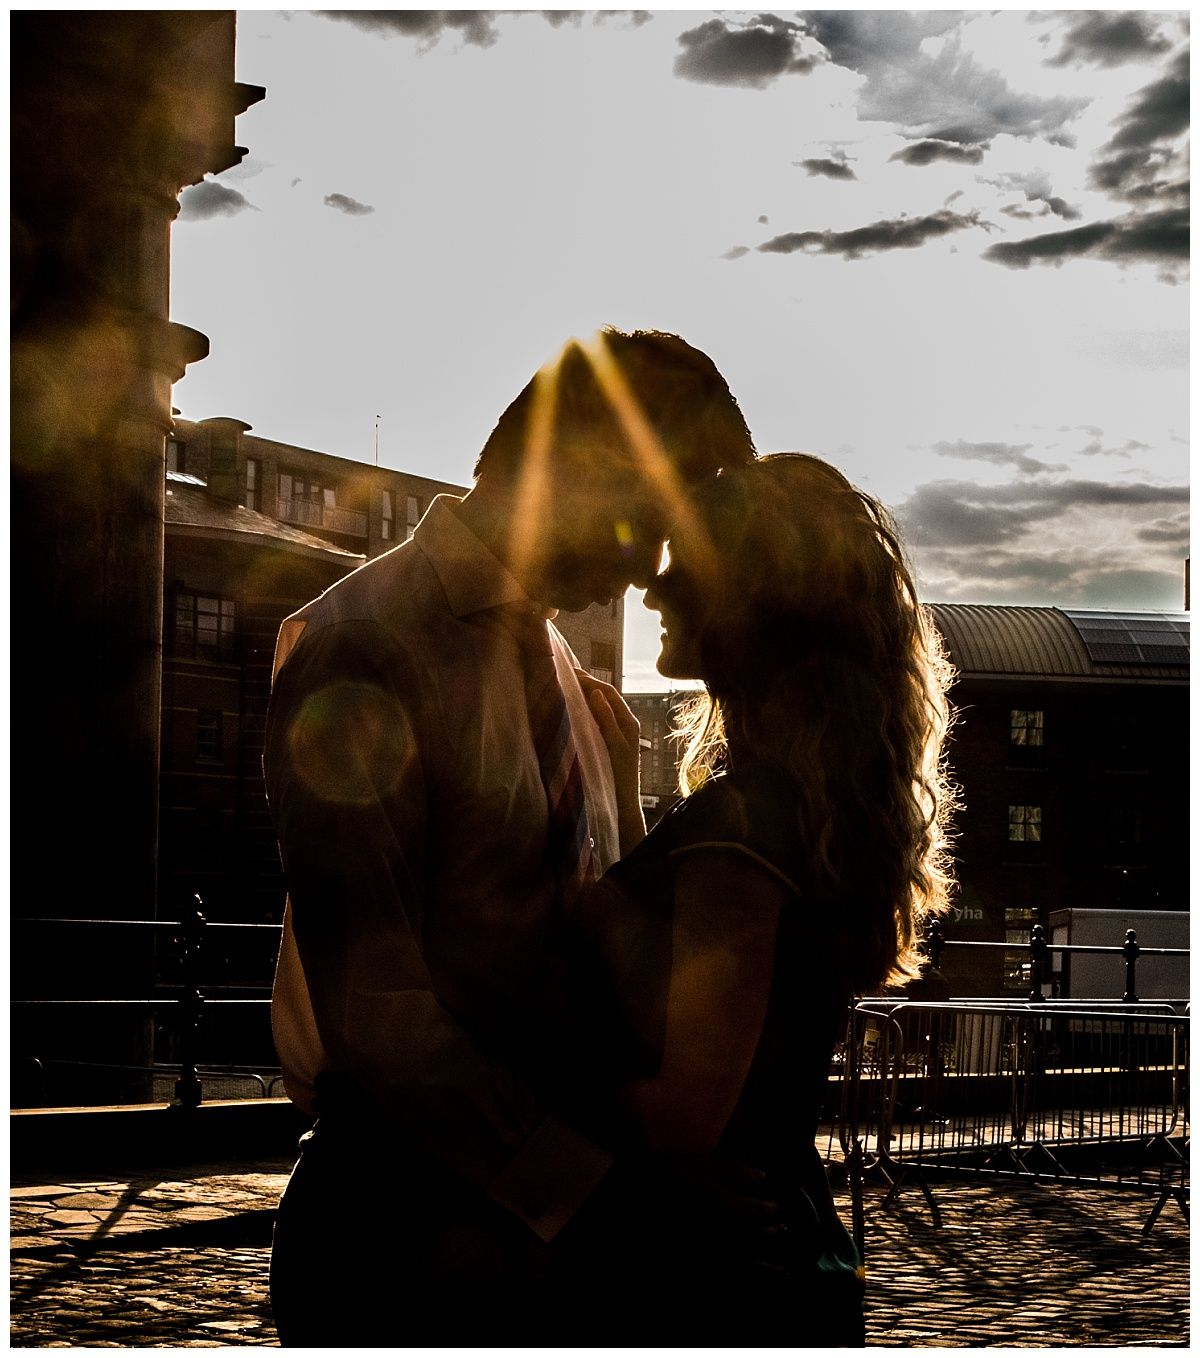 Rick Dell Photography - Stephanie and James’s Pre wedding Shoot in Castlefield